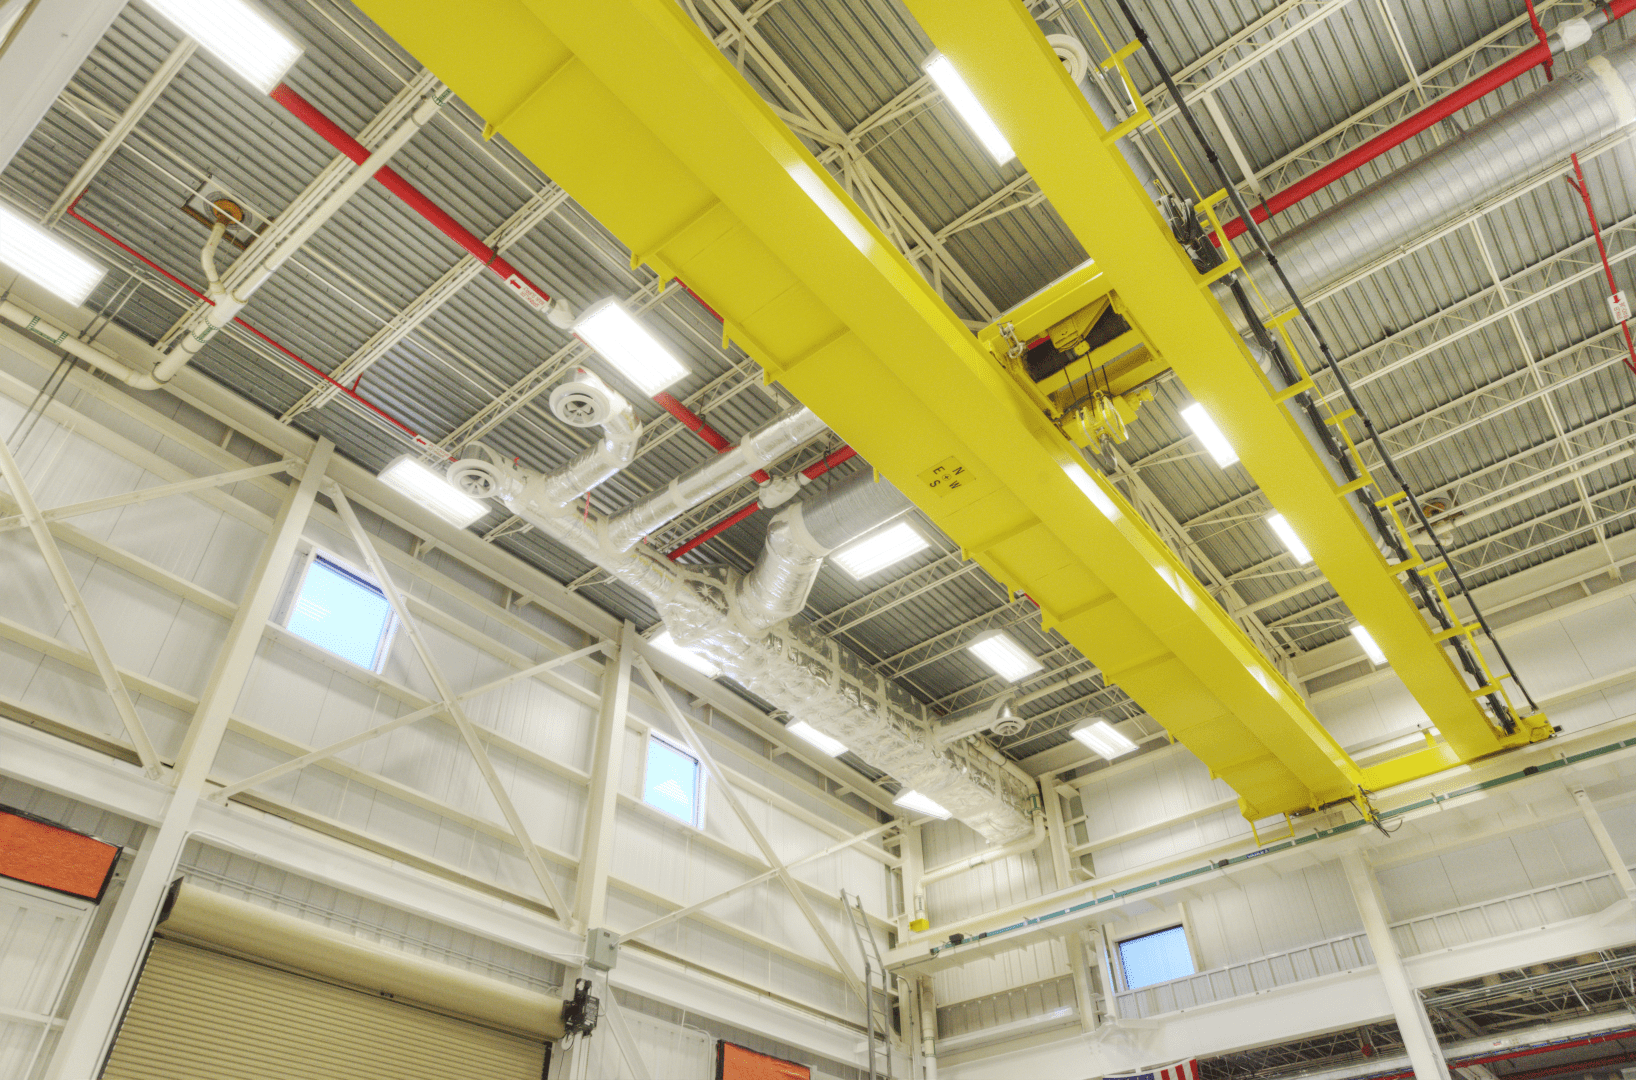 Warehouse ceiling with yellow beams